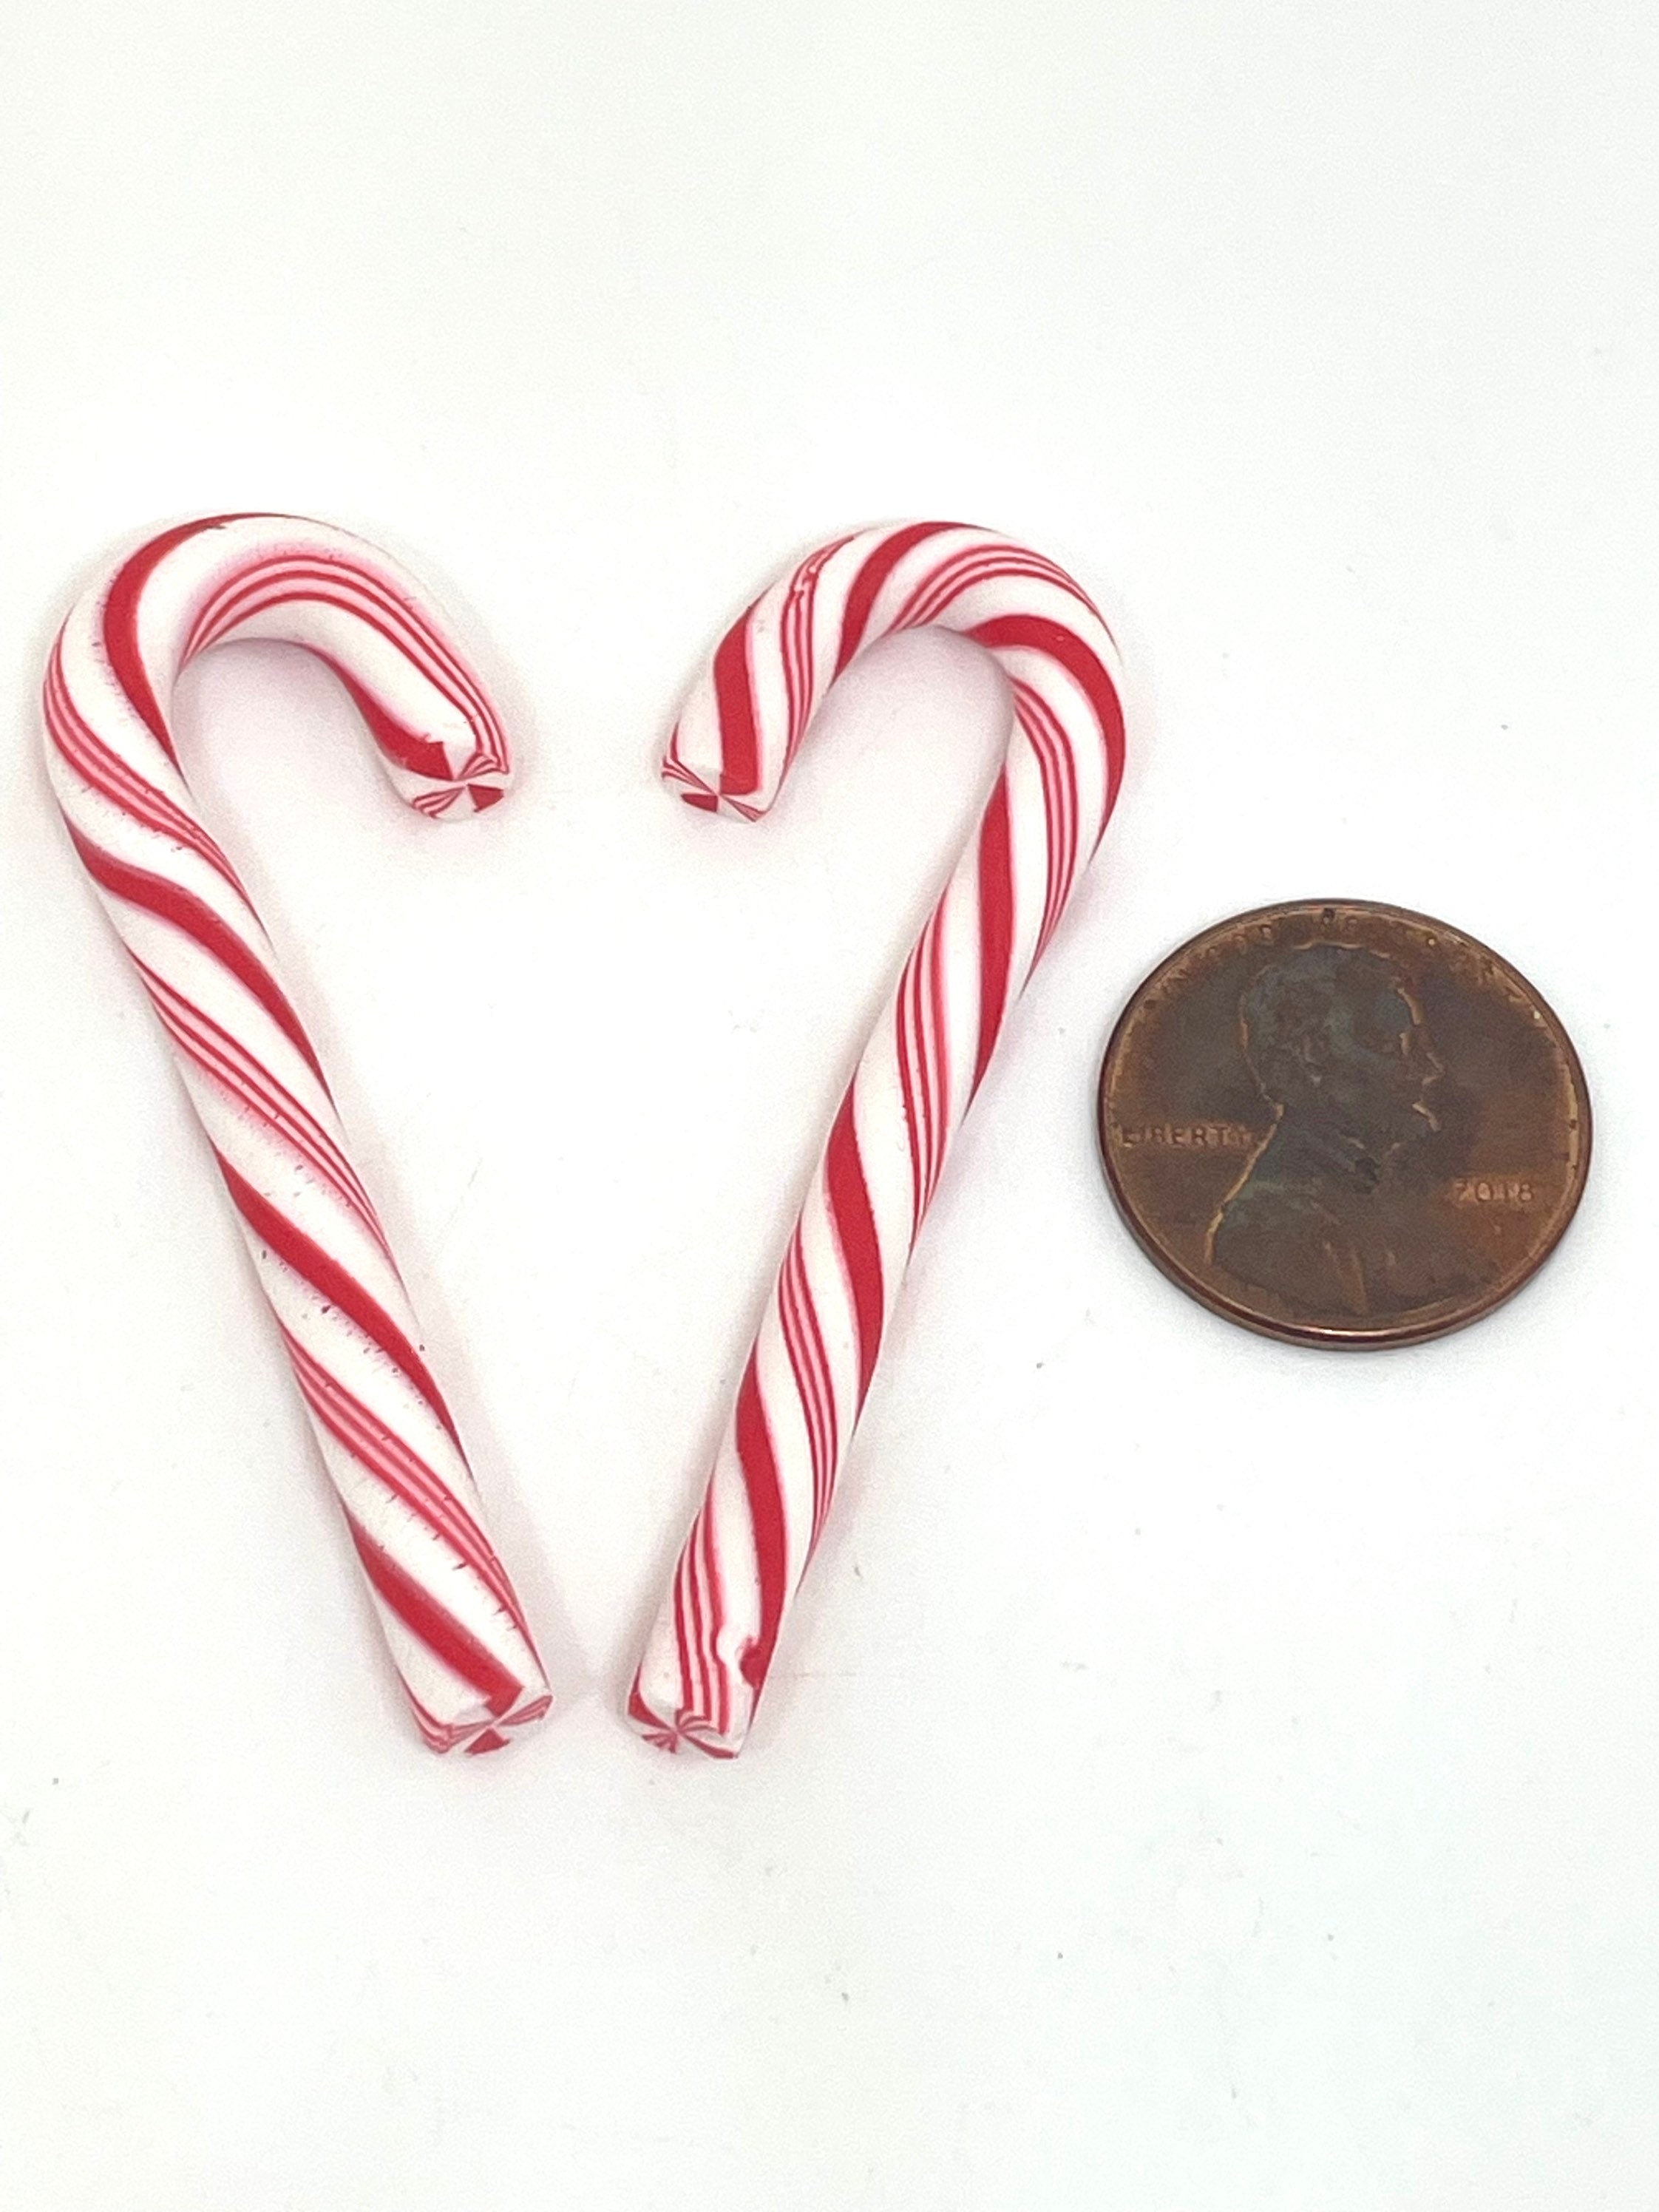 Peppermint Sticks Candy Cane Swirl Charms Fake Candies Charm Solid